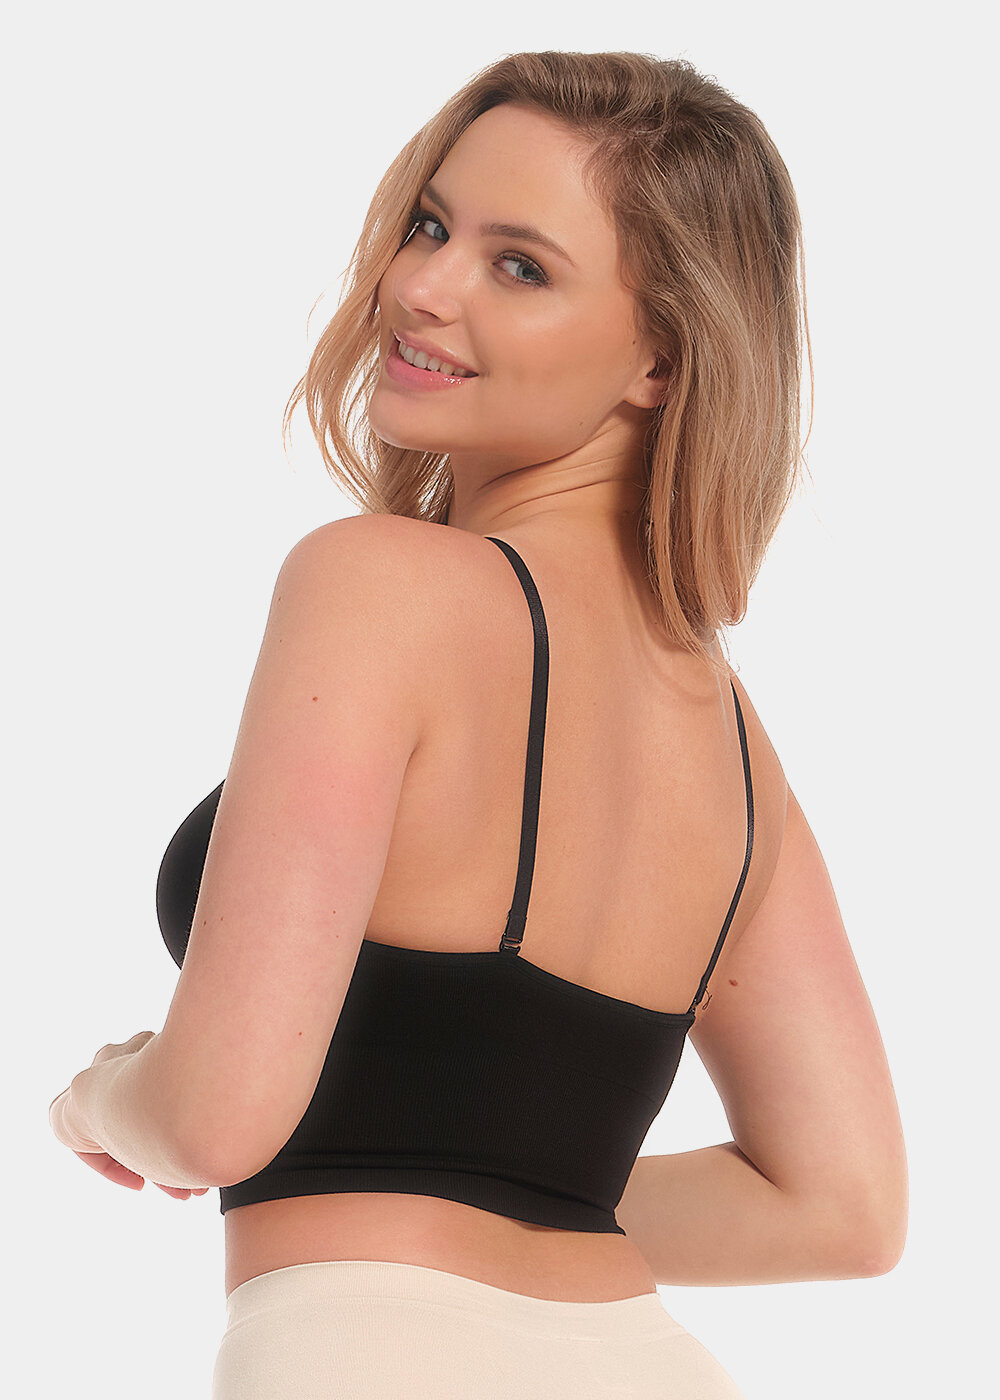 Bandeau Bra Top With Removable Straps. Organic Bamboo Super Soft